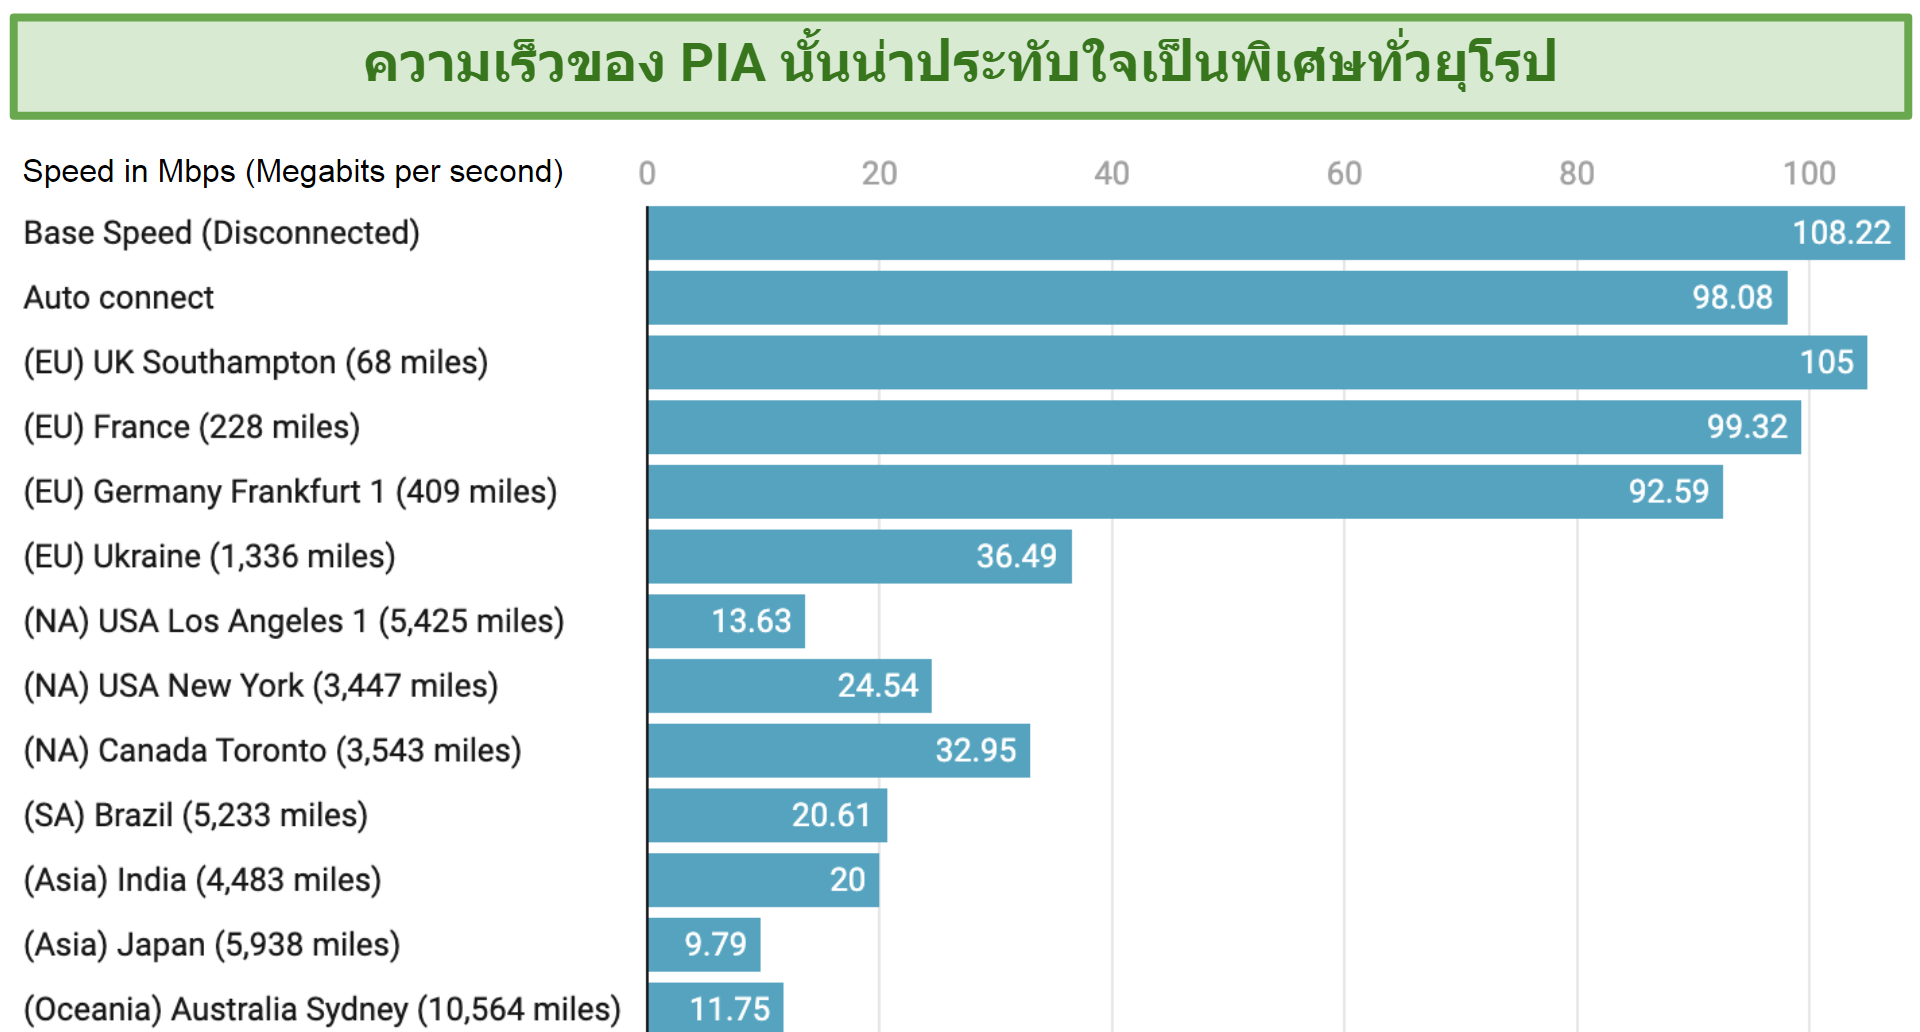 Graph showing the fast speeds over distance offered by PIA